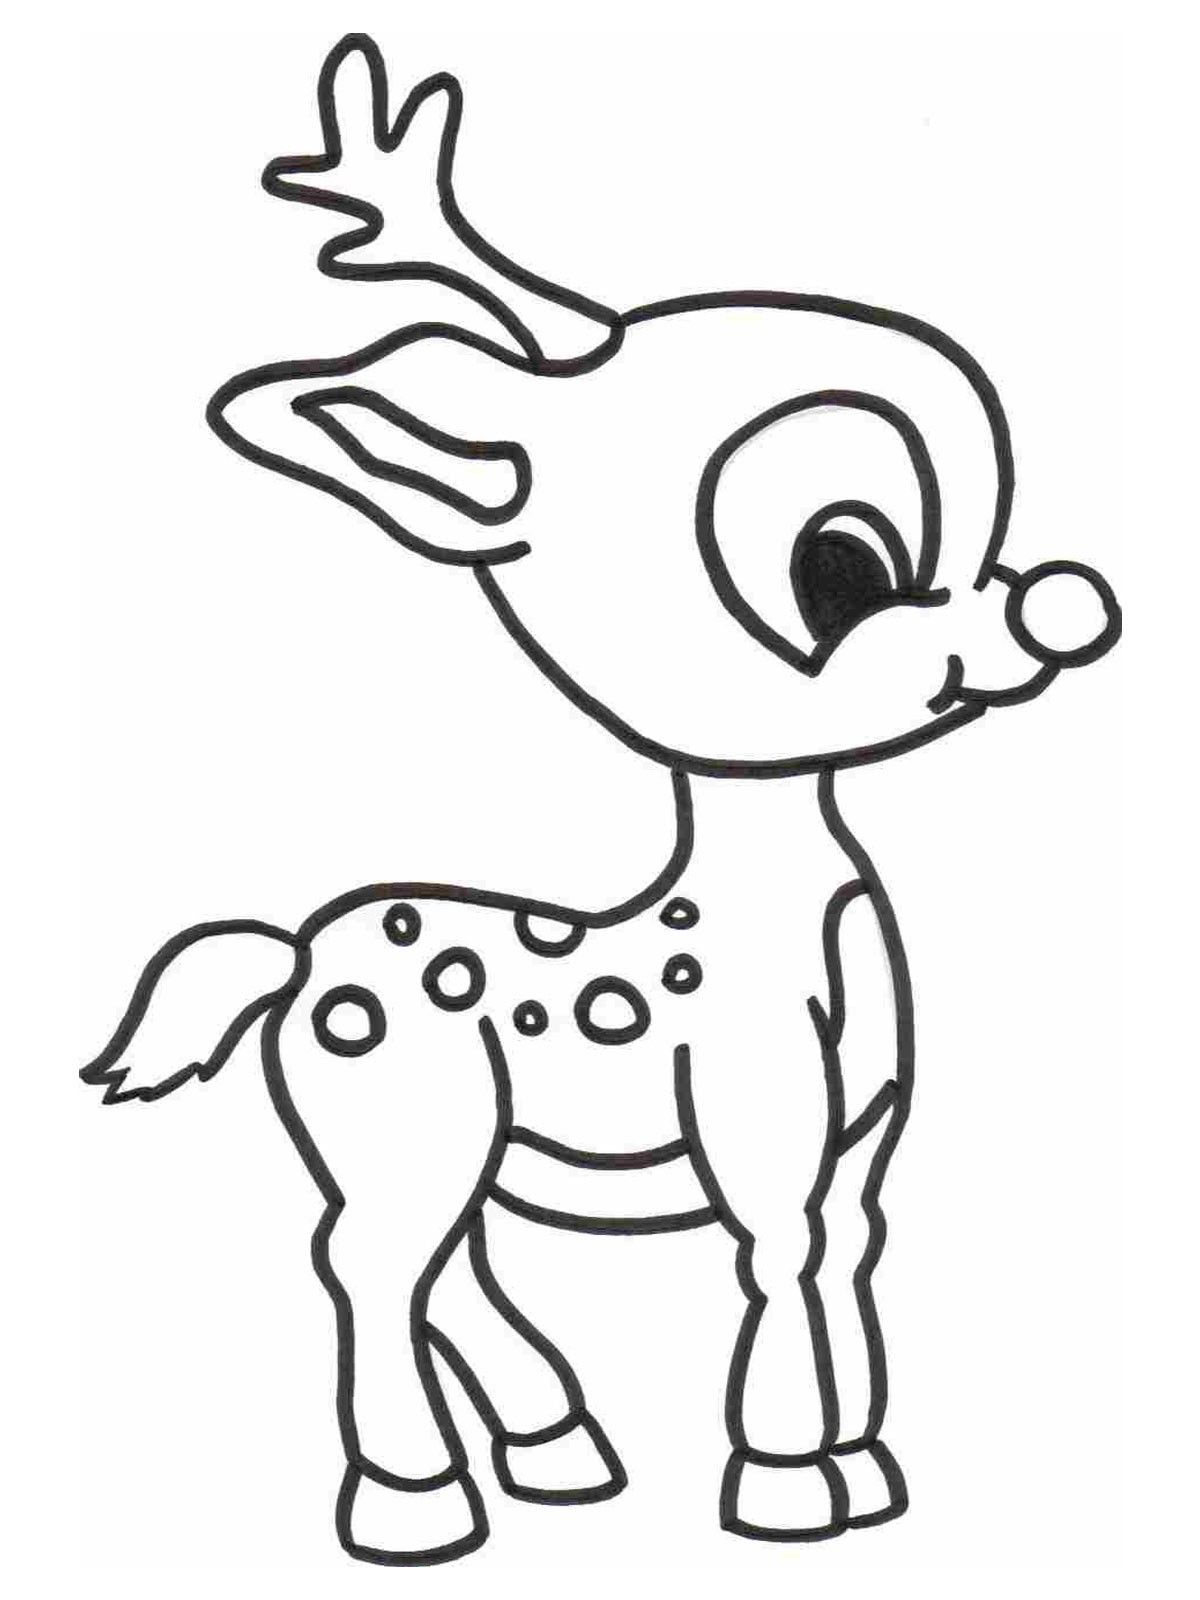 Easy Coloring Pages For Kids Of Animals - 123 Free Coloring Pages